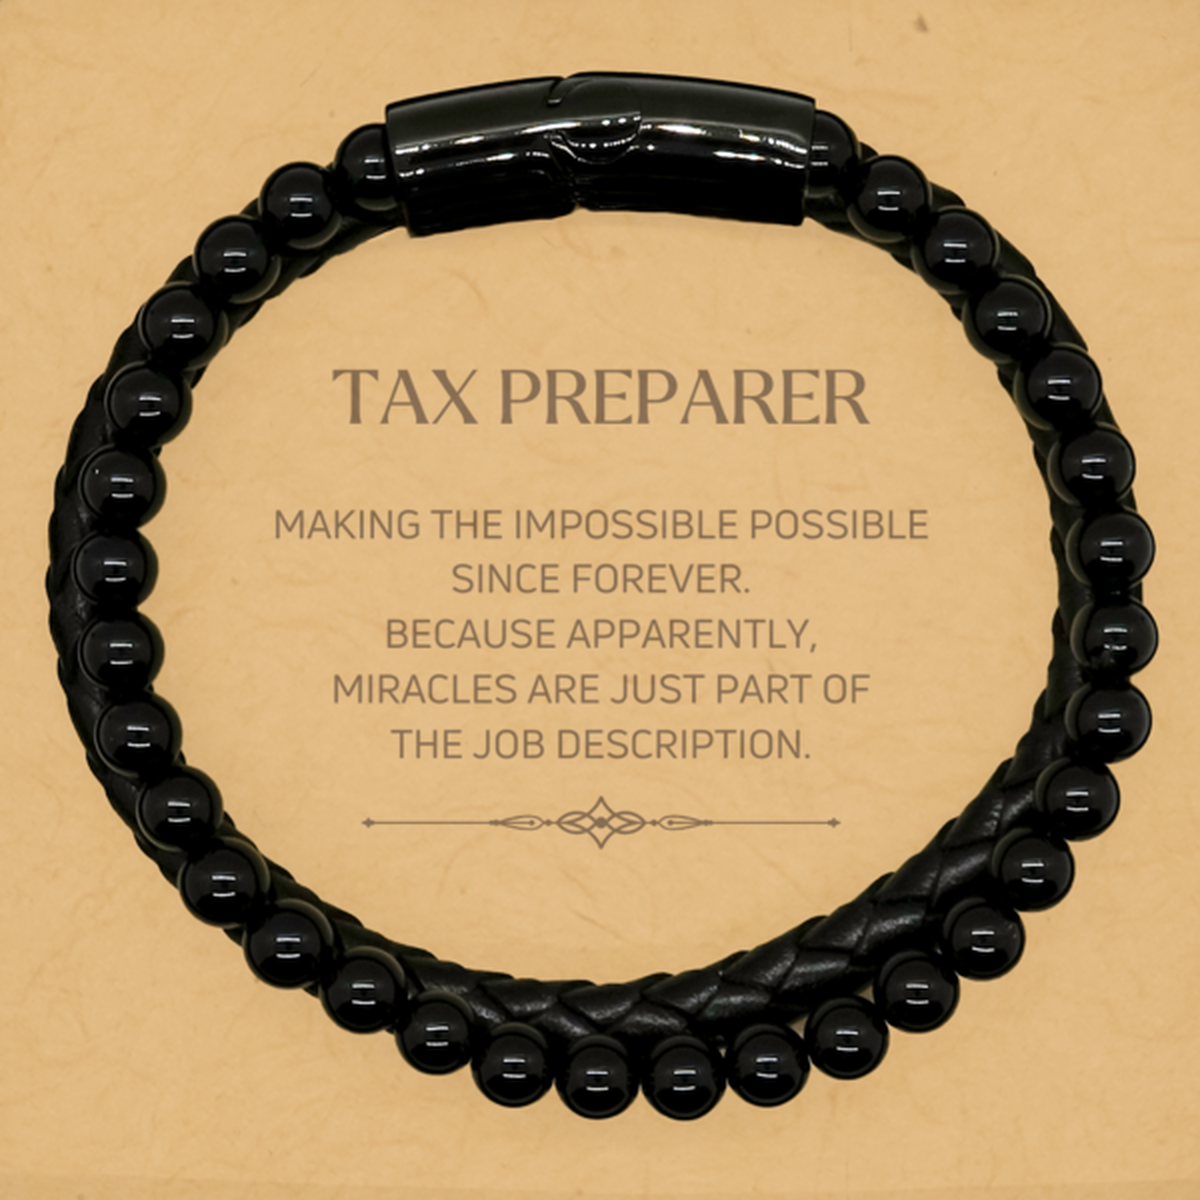 Funny Tax Preparer Gifts, Miracles are just part of the job description, Inspirational Birthday Stone Leather Bracelets For Tax Preparer, Men, Women, Coworkers, Friends, Boss